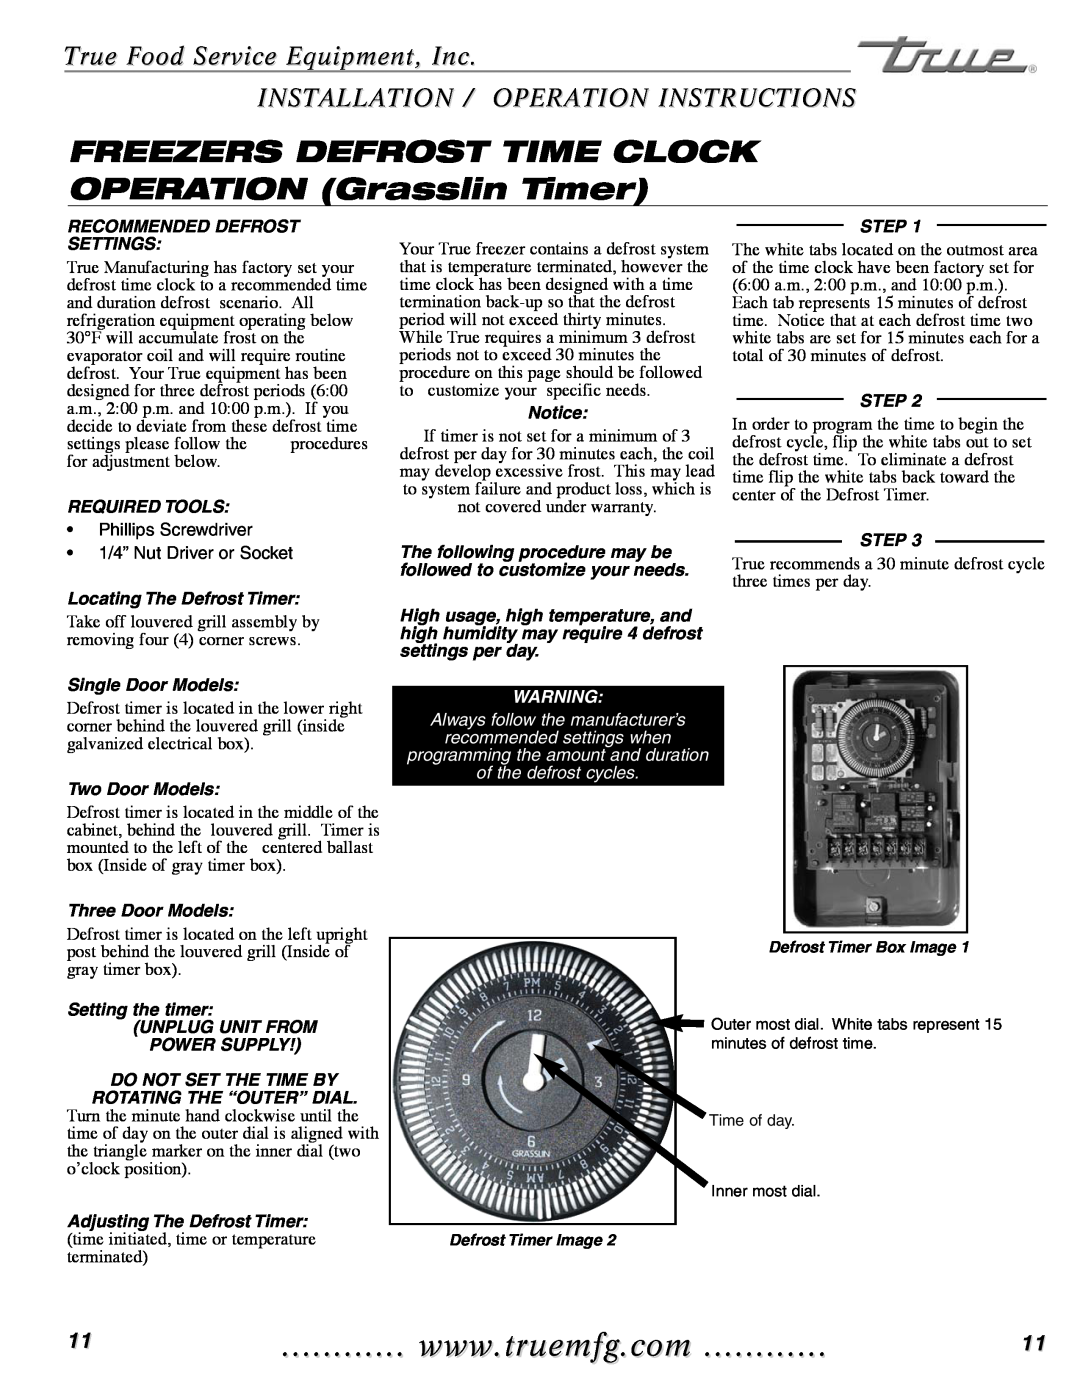 True Manufacturing Company GDIM-26NT Freezers Defrost Time Clock, OPERATION Grasslin Timer, recommended settings when 